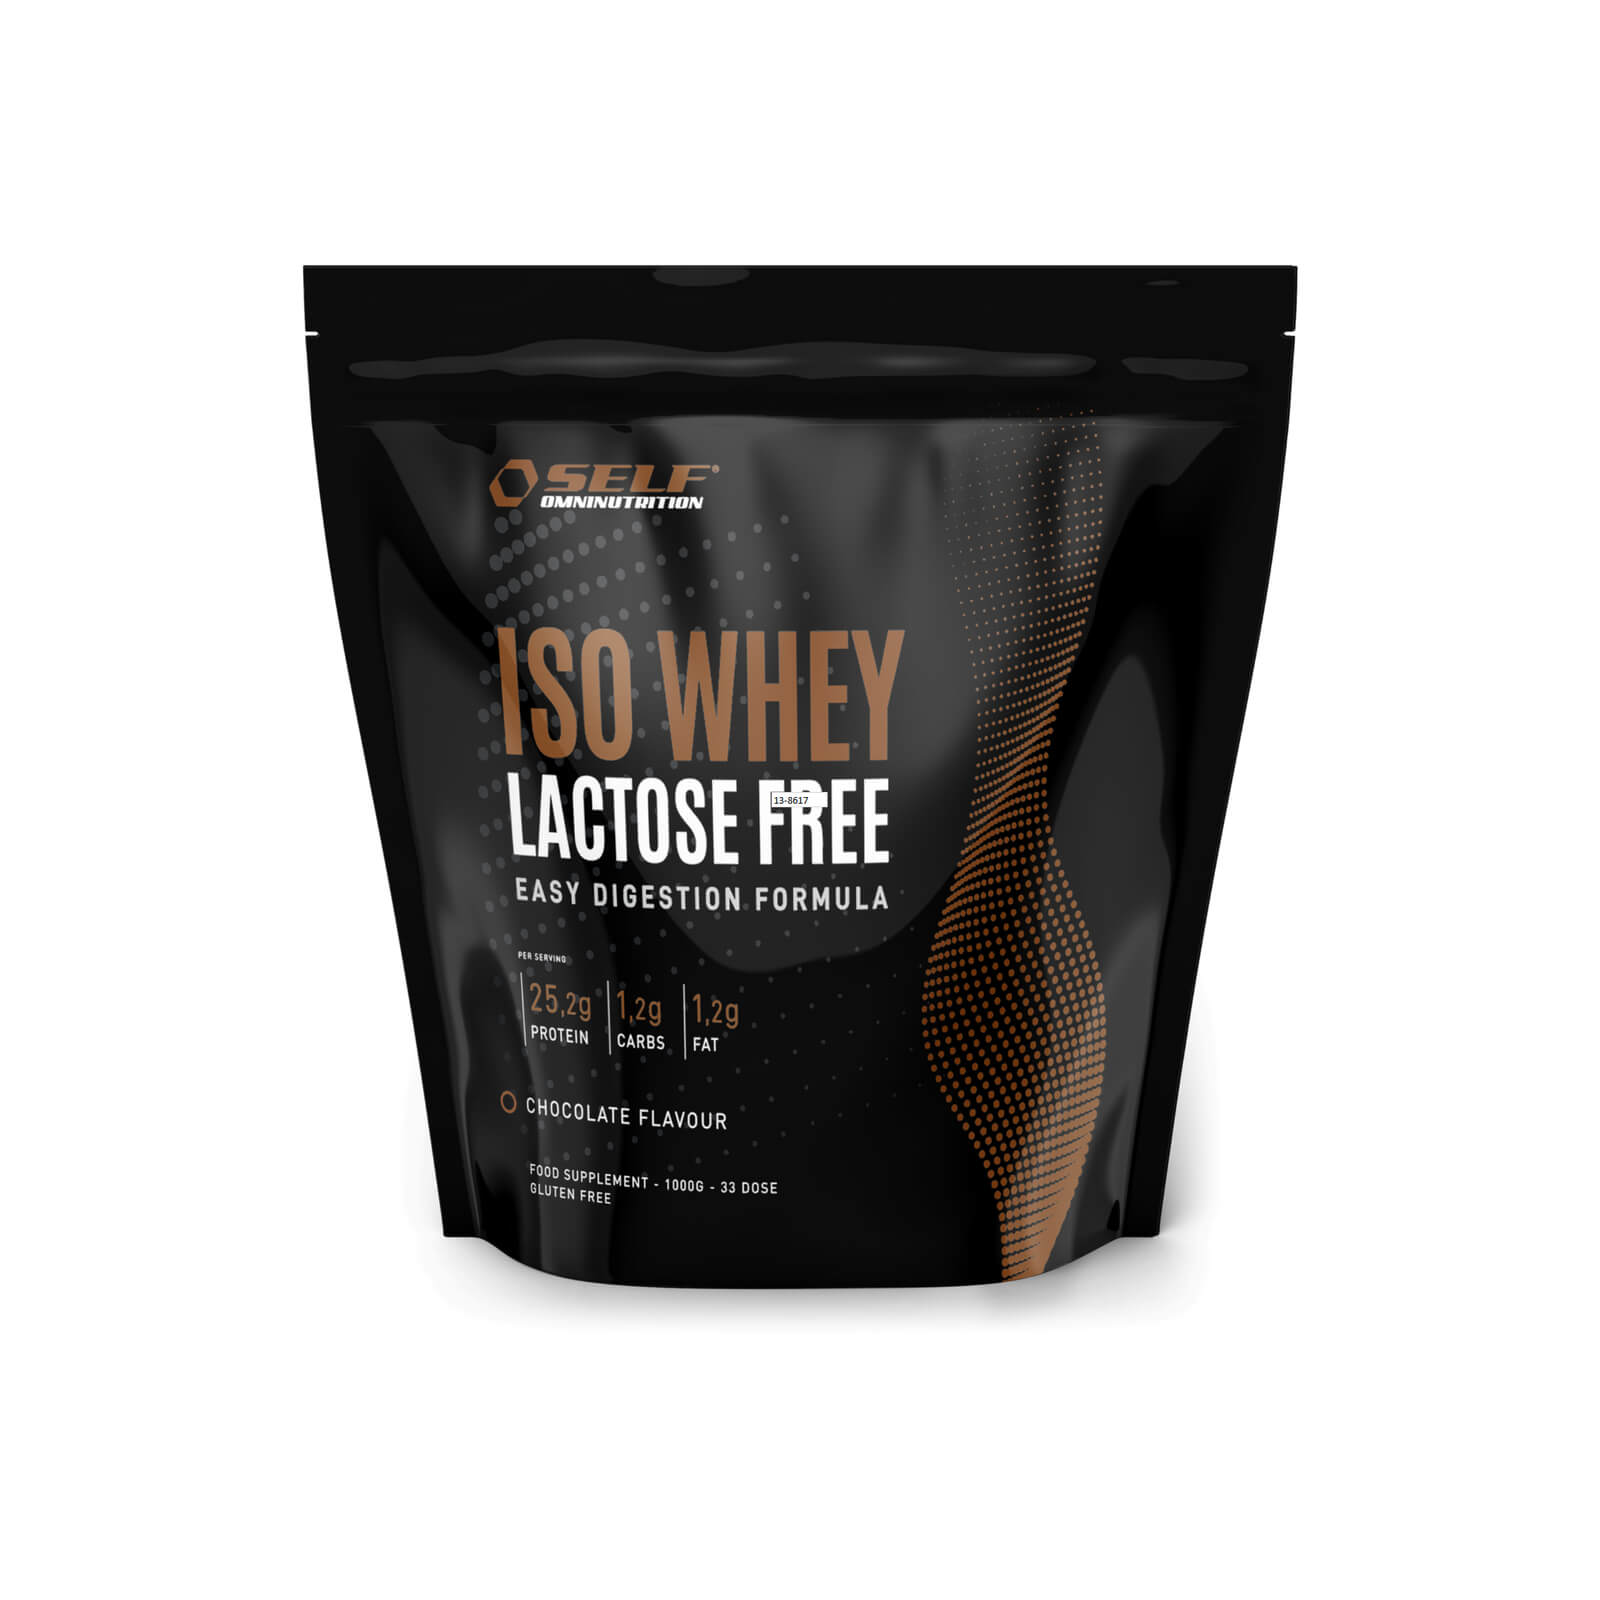 Iso Whey Lactose Free, 1 kg, Self